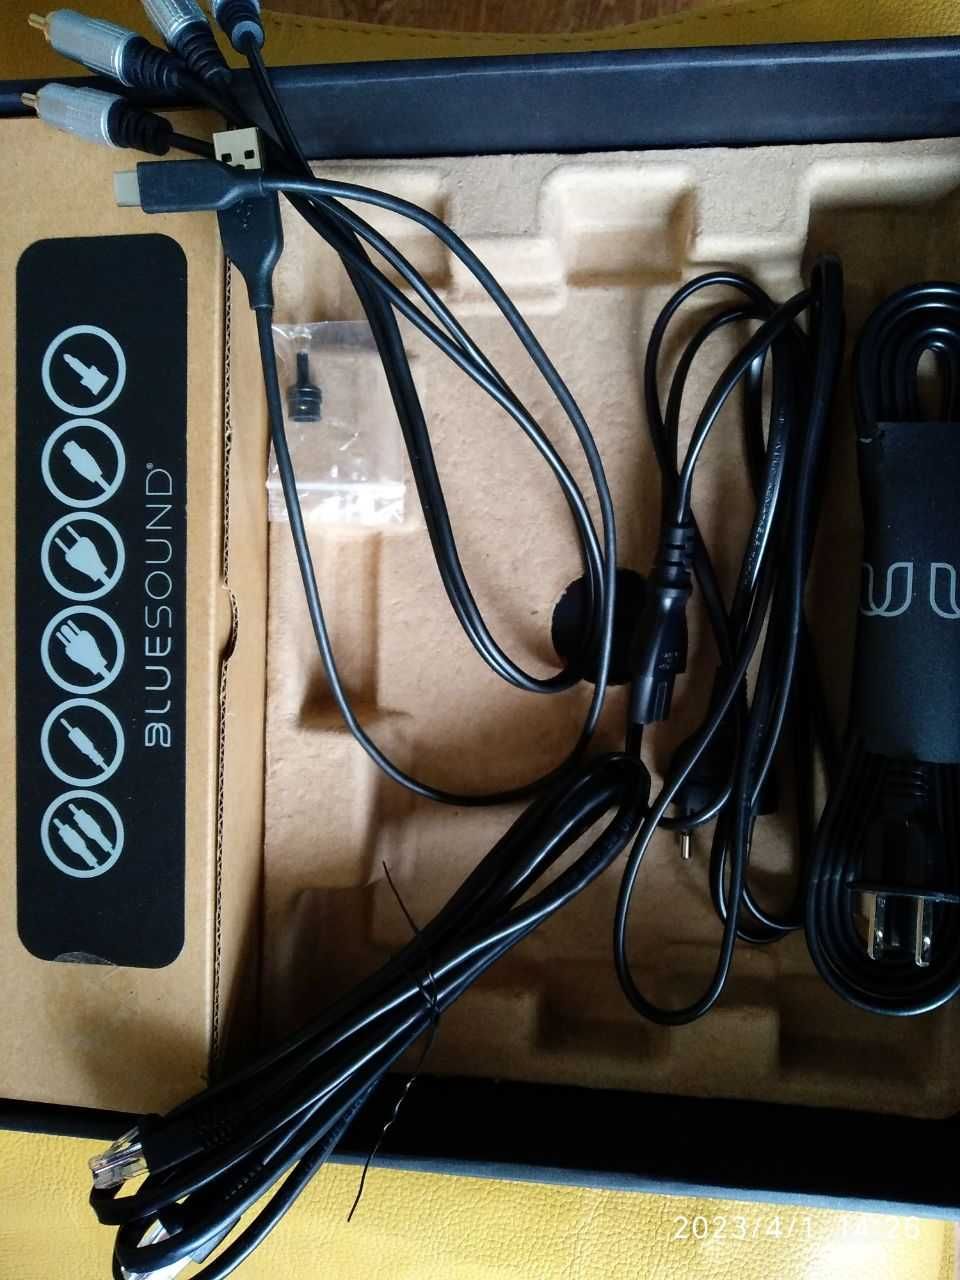 My own audio receiver / DAC Bluesound node 2i is on sale now